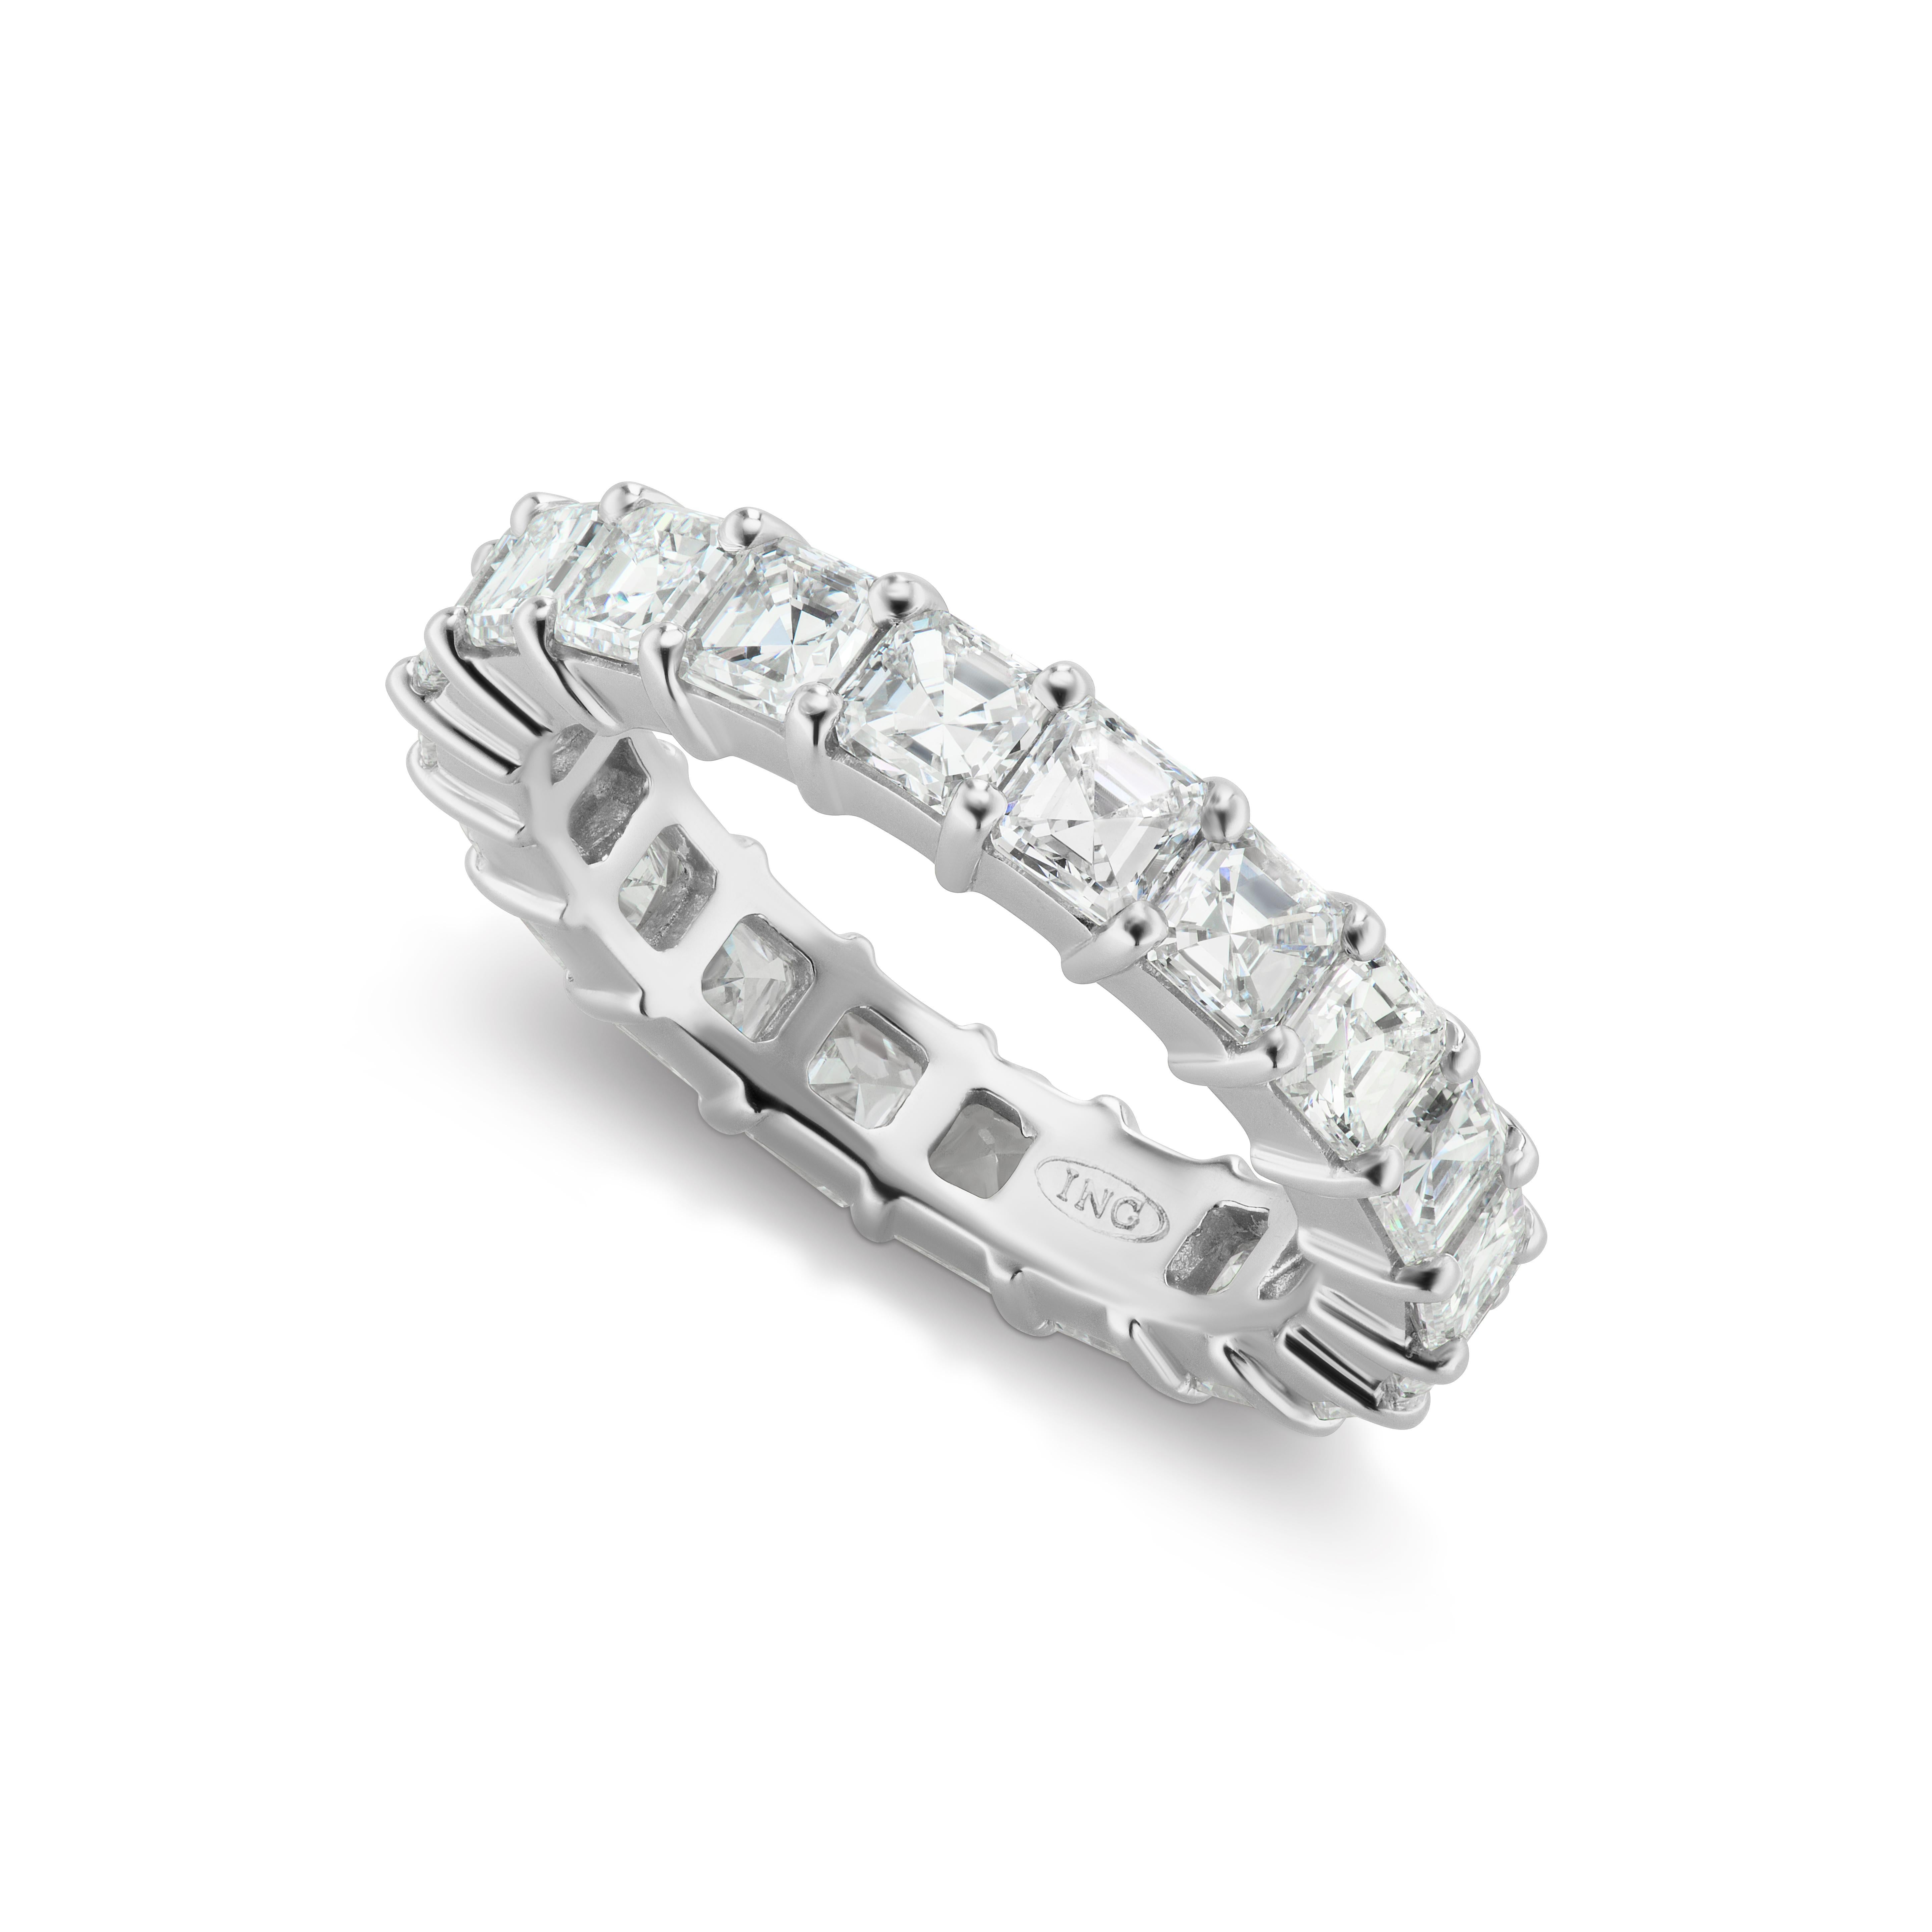 This stunning Asscher Cut diamond eternity band holds 20 stones F color VS quality weight 3.71 ct. total weight. It is Platinum in a size 6.
Not your size? Not a problem! We can easily make another to fit your finger. If you don't see something, say